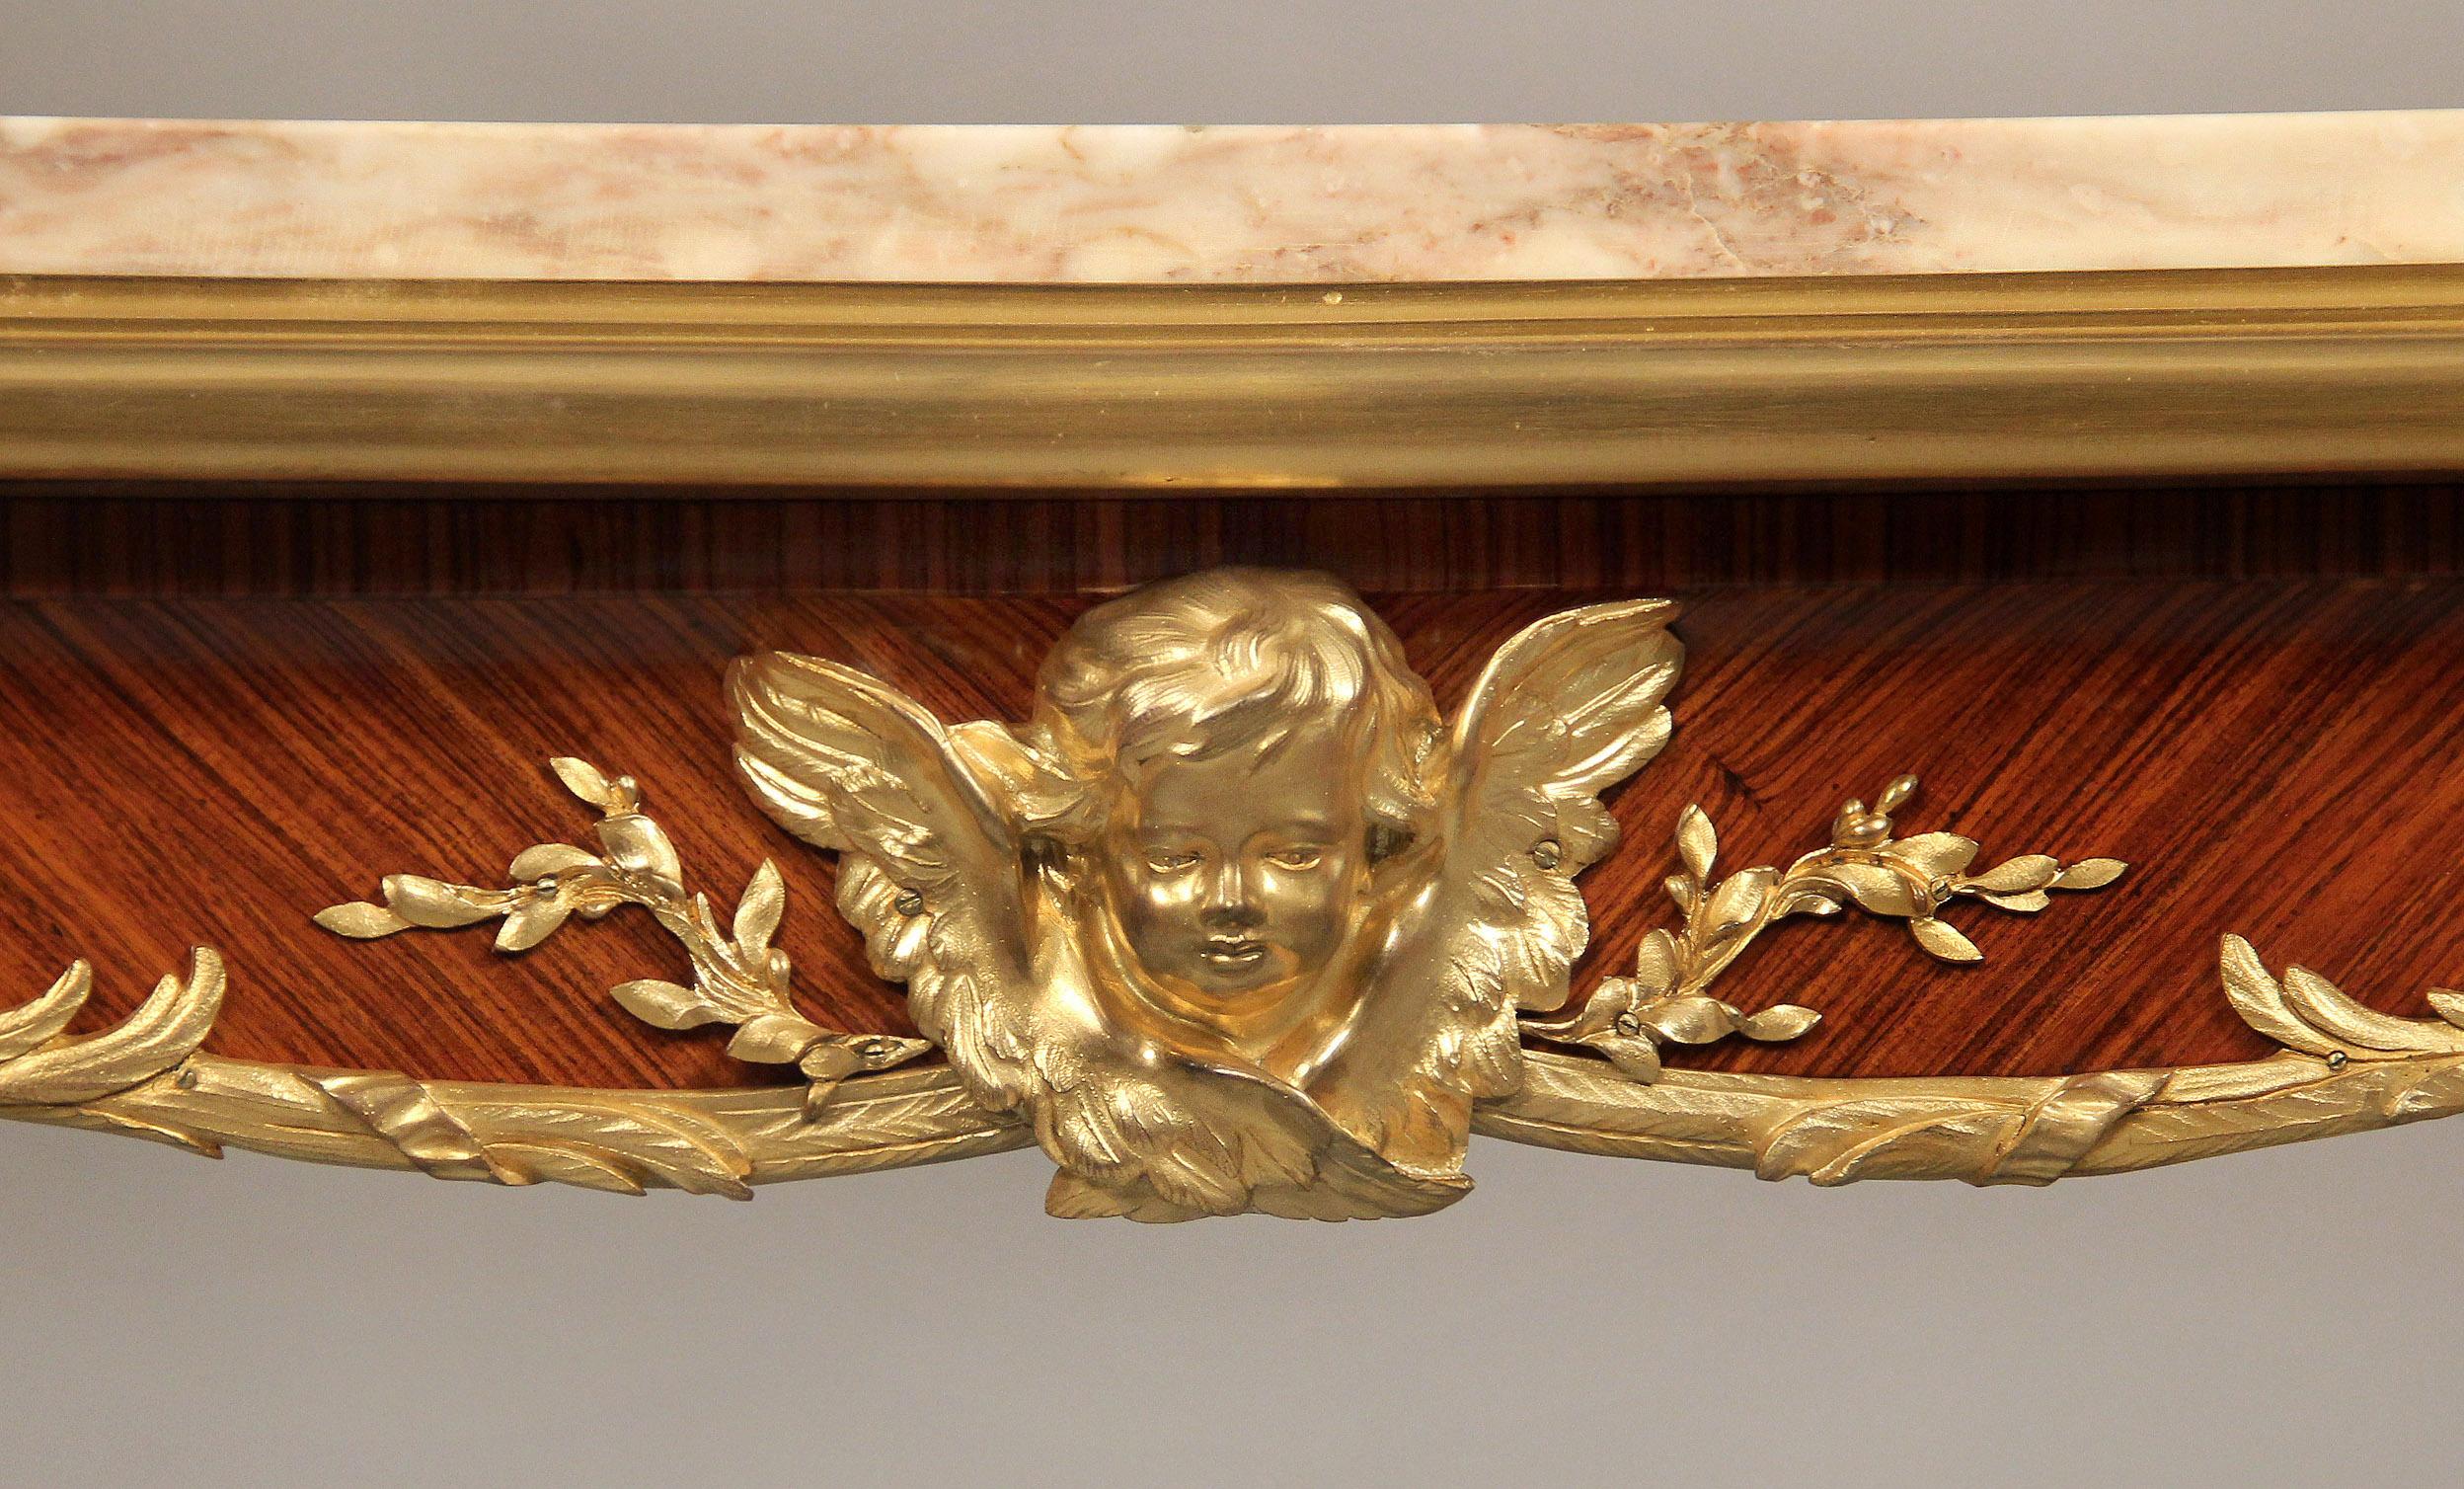 A superb late 19th century gilt bronze mounted Regence style center table by François Linke

The inset shaped marble top above a single drawer centered with a winged cherub head, the back with similar mounts, each leg with bronze mounts of